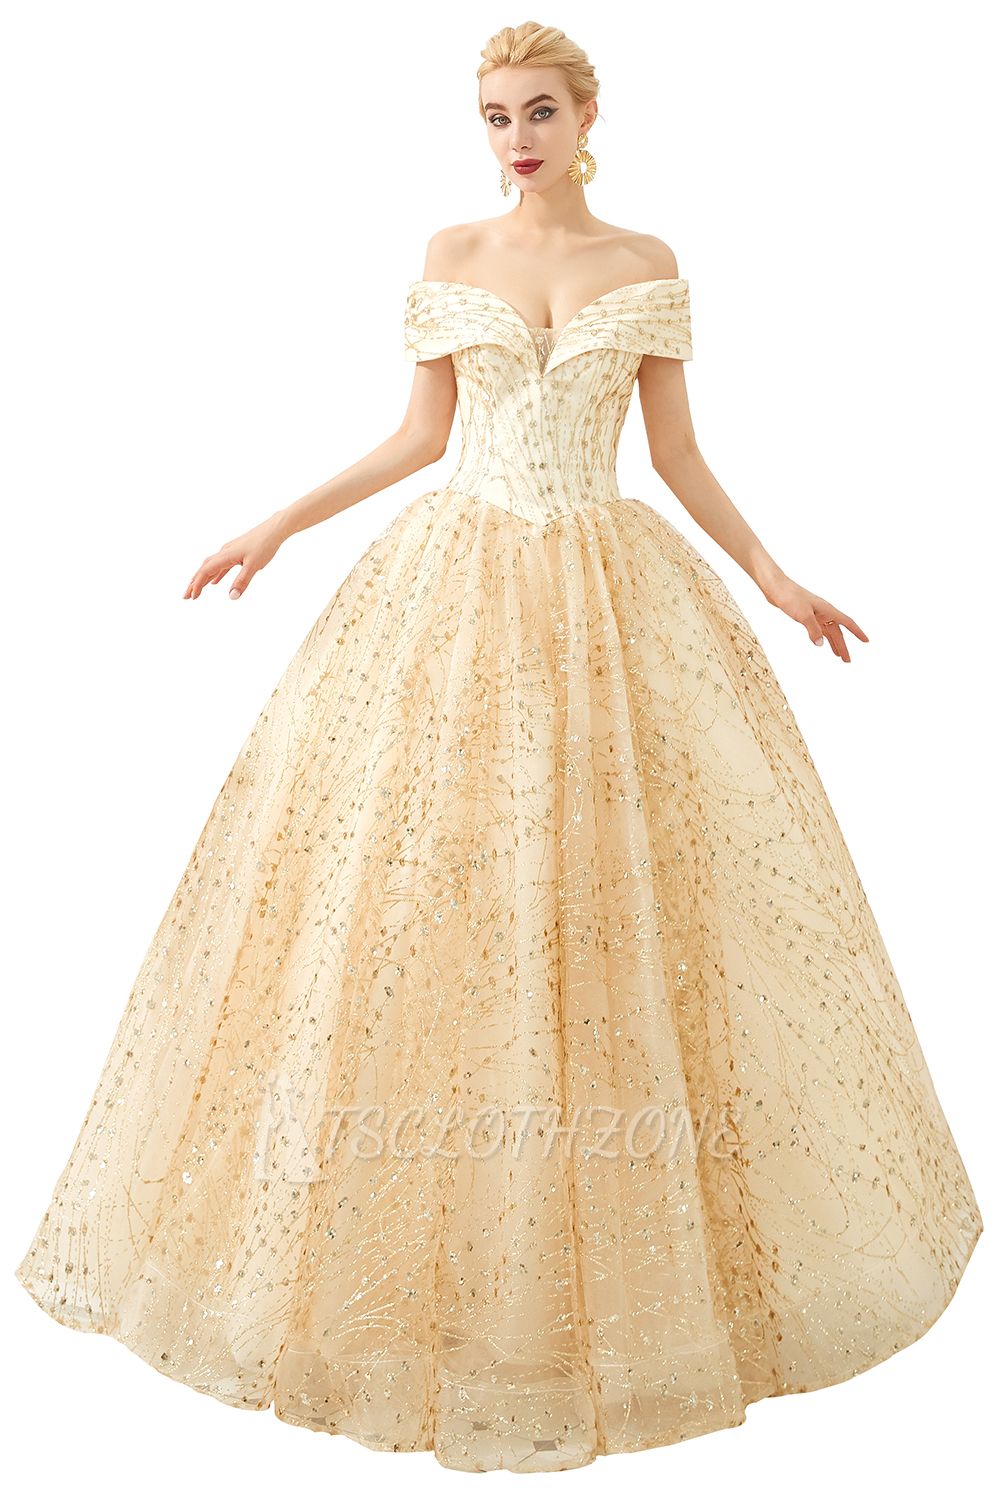 Herman | Luxury Off-the-shoulder Ball Gown for Prom/Evening with Sparkly Floral Appliques